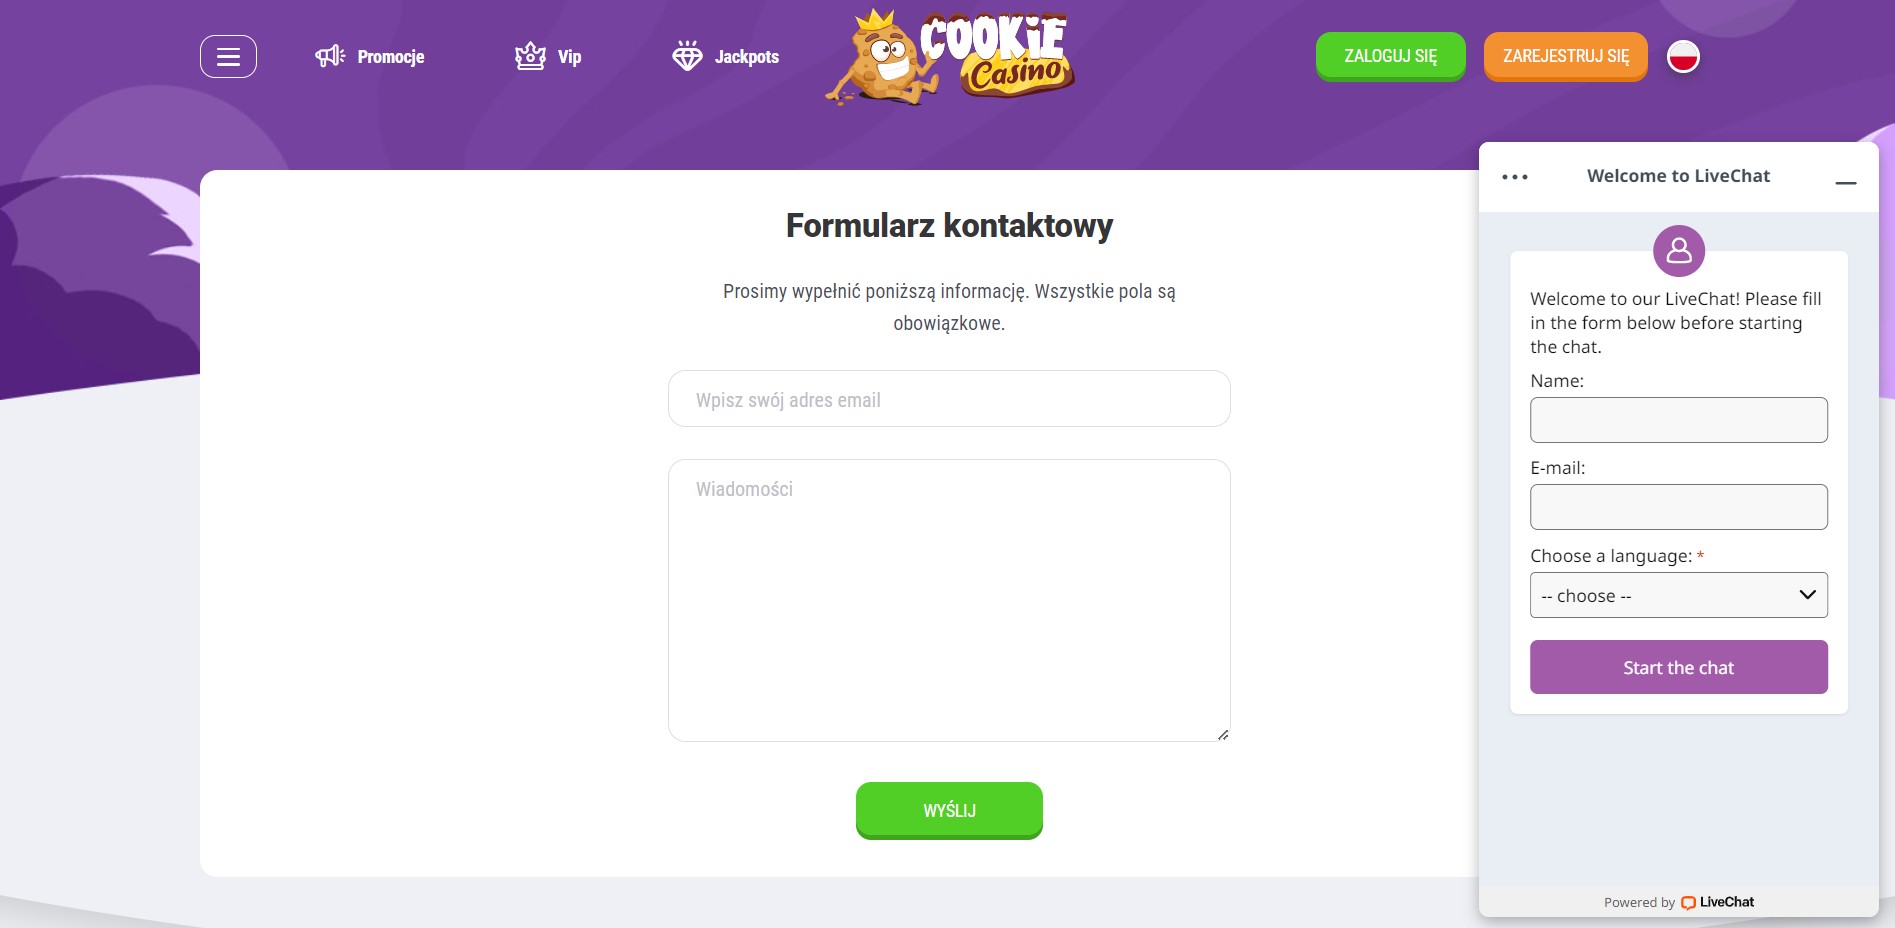 Cookie Casino Review